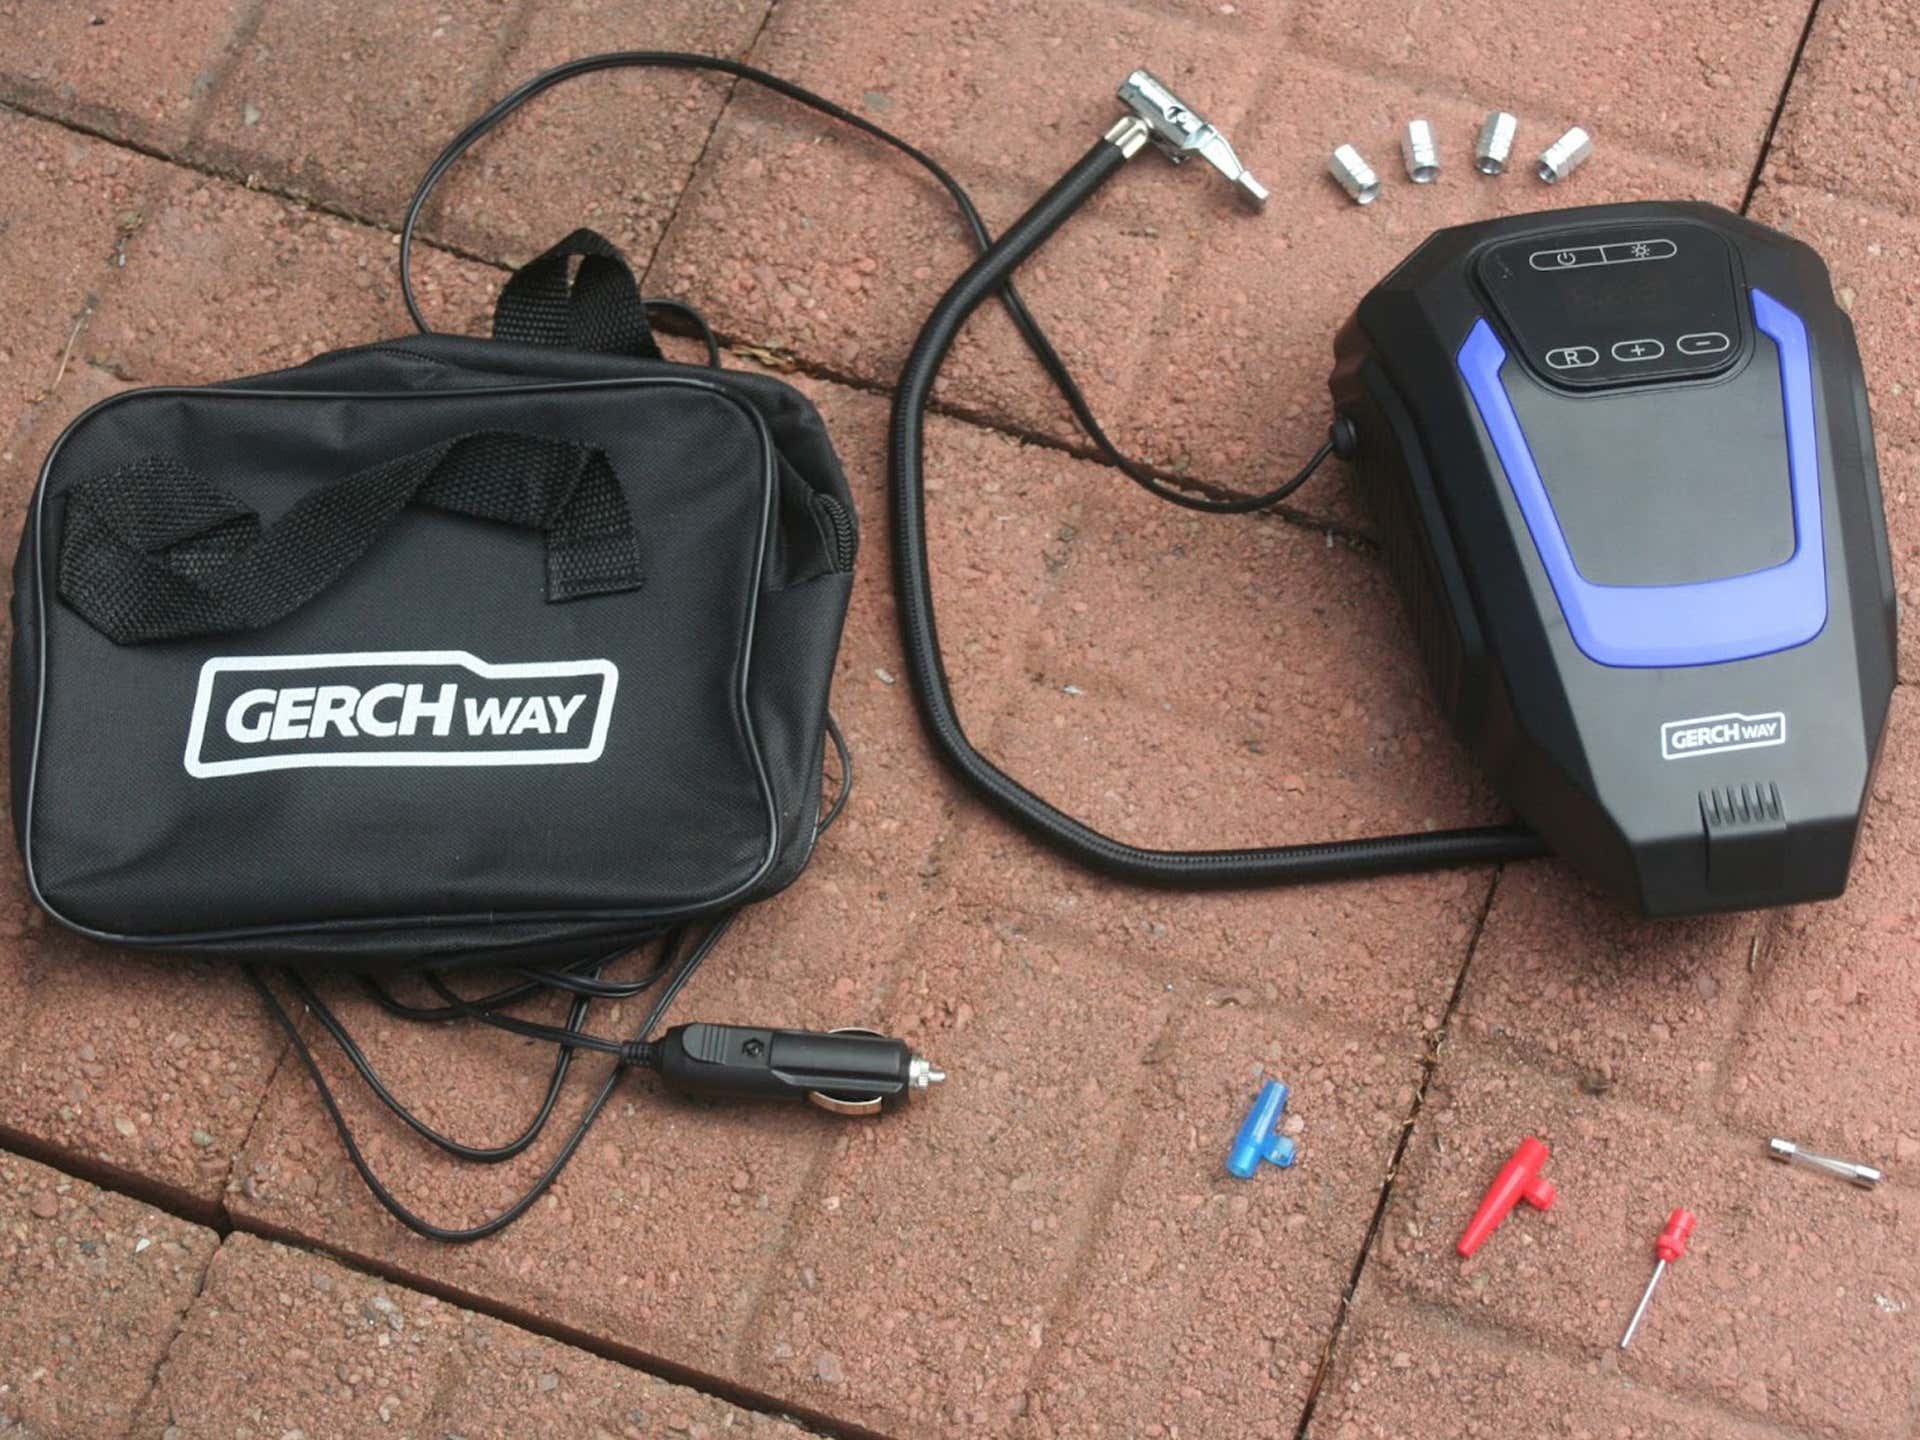 Gerchway Tire Inflator Portable Air Compressor